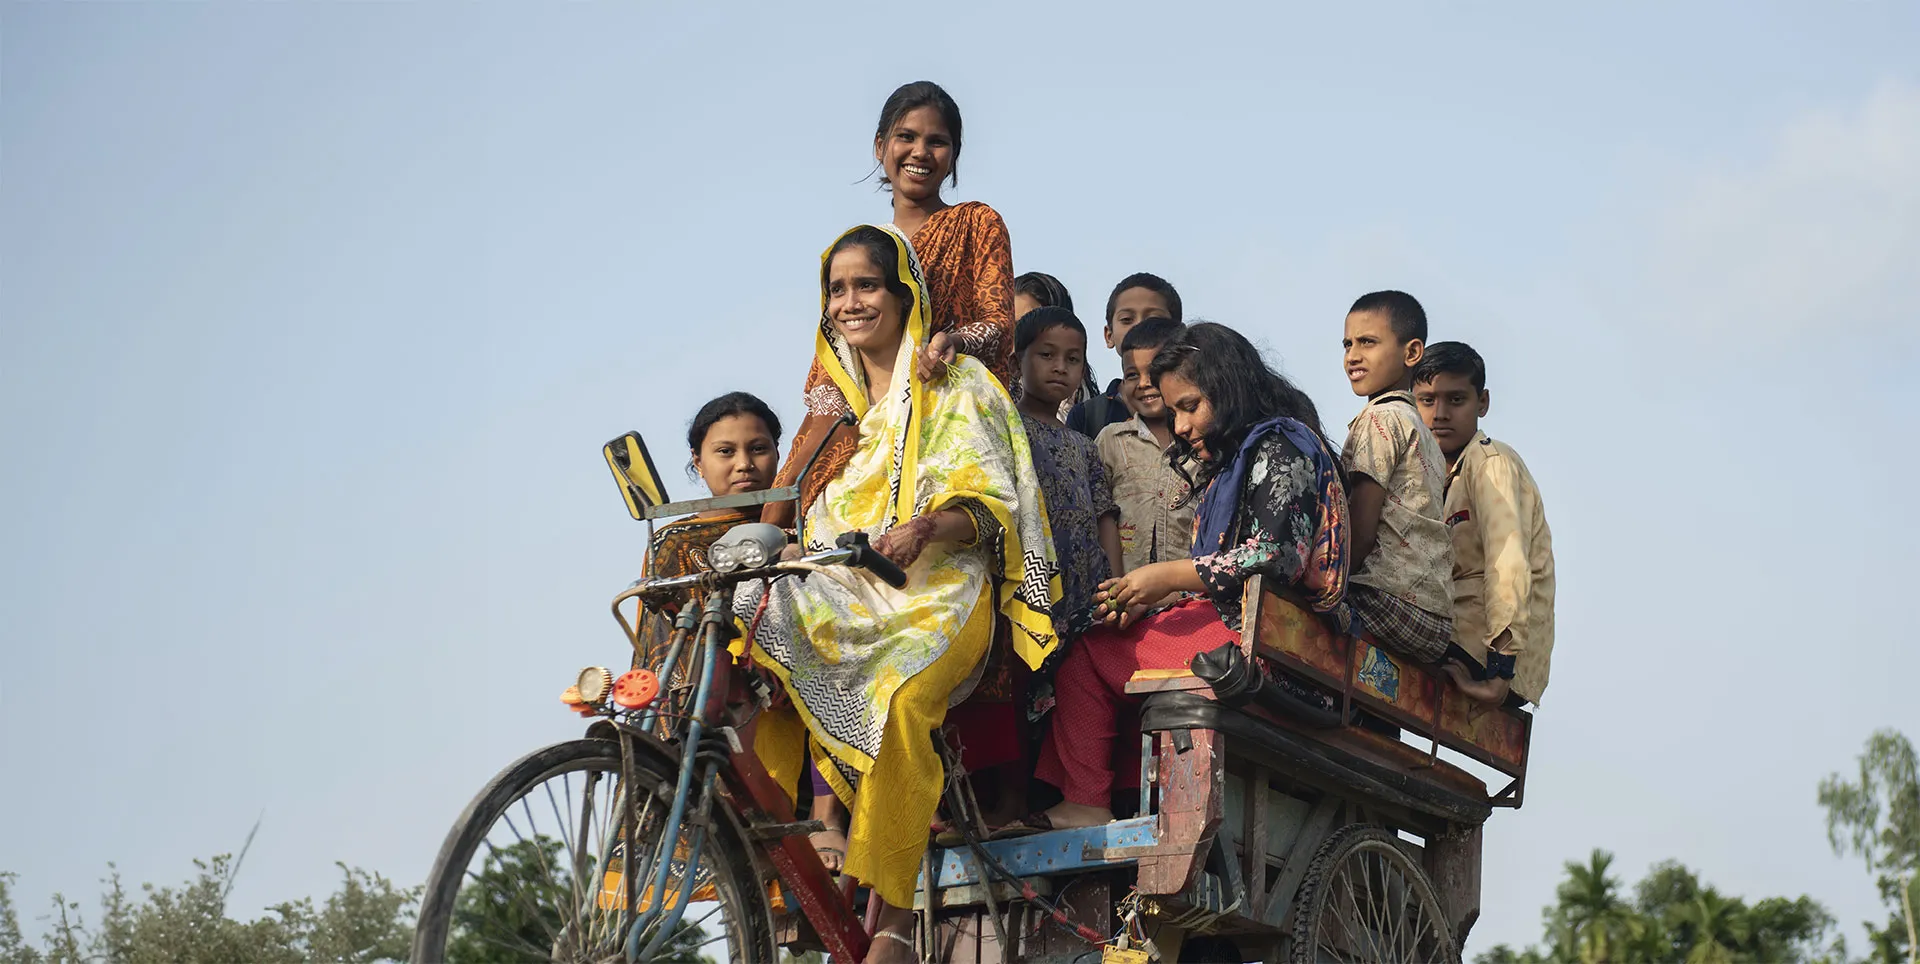 A large group of girls ride together on a bike-drawn cart.